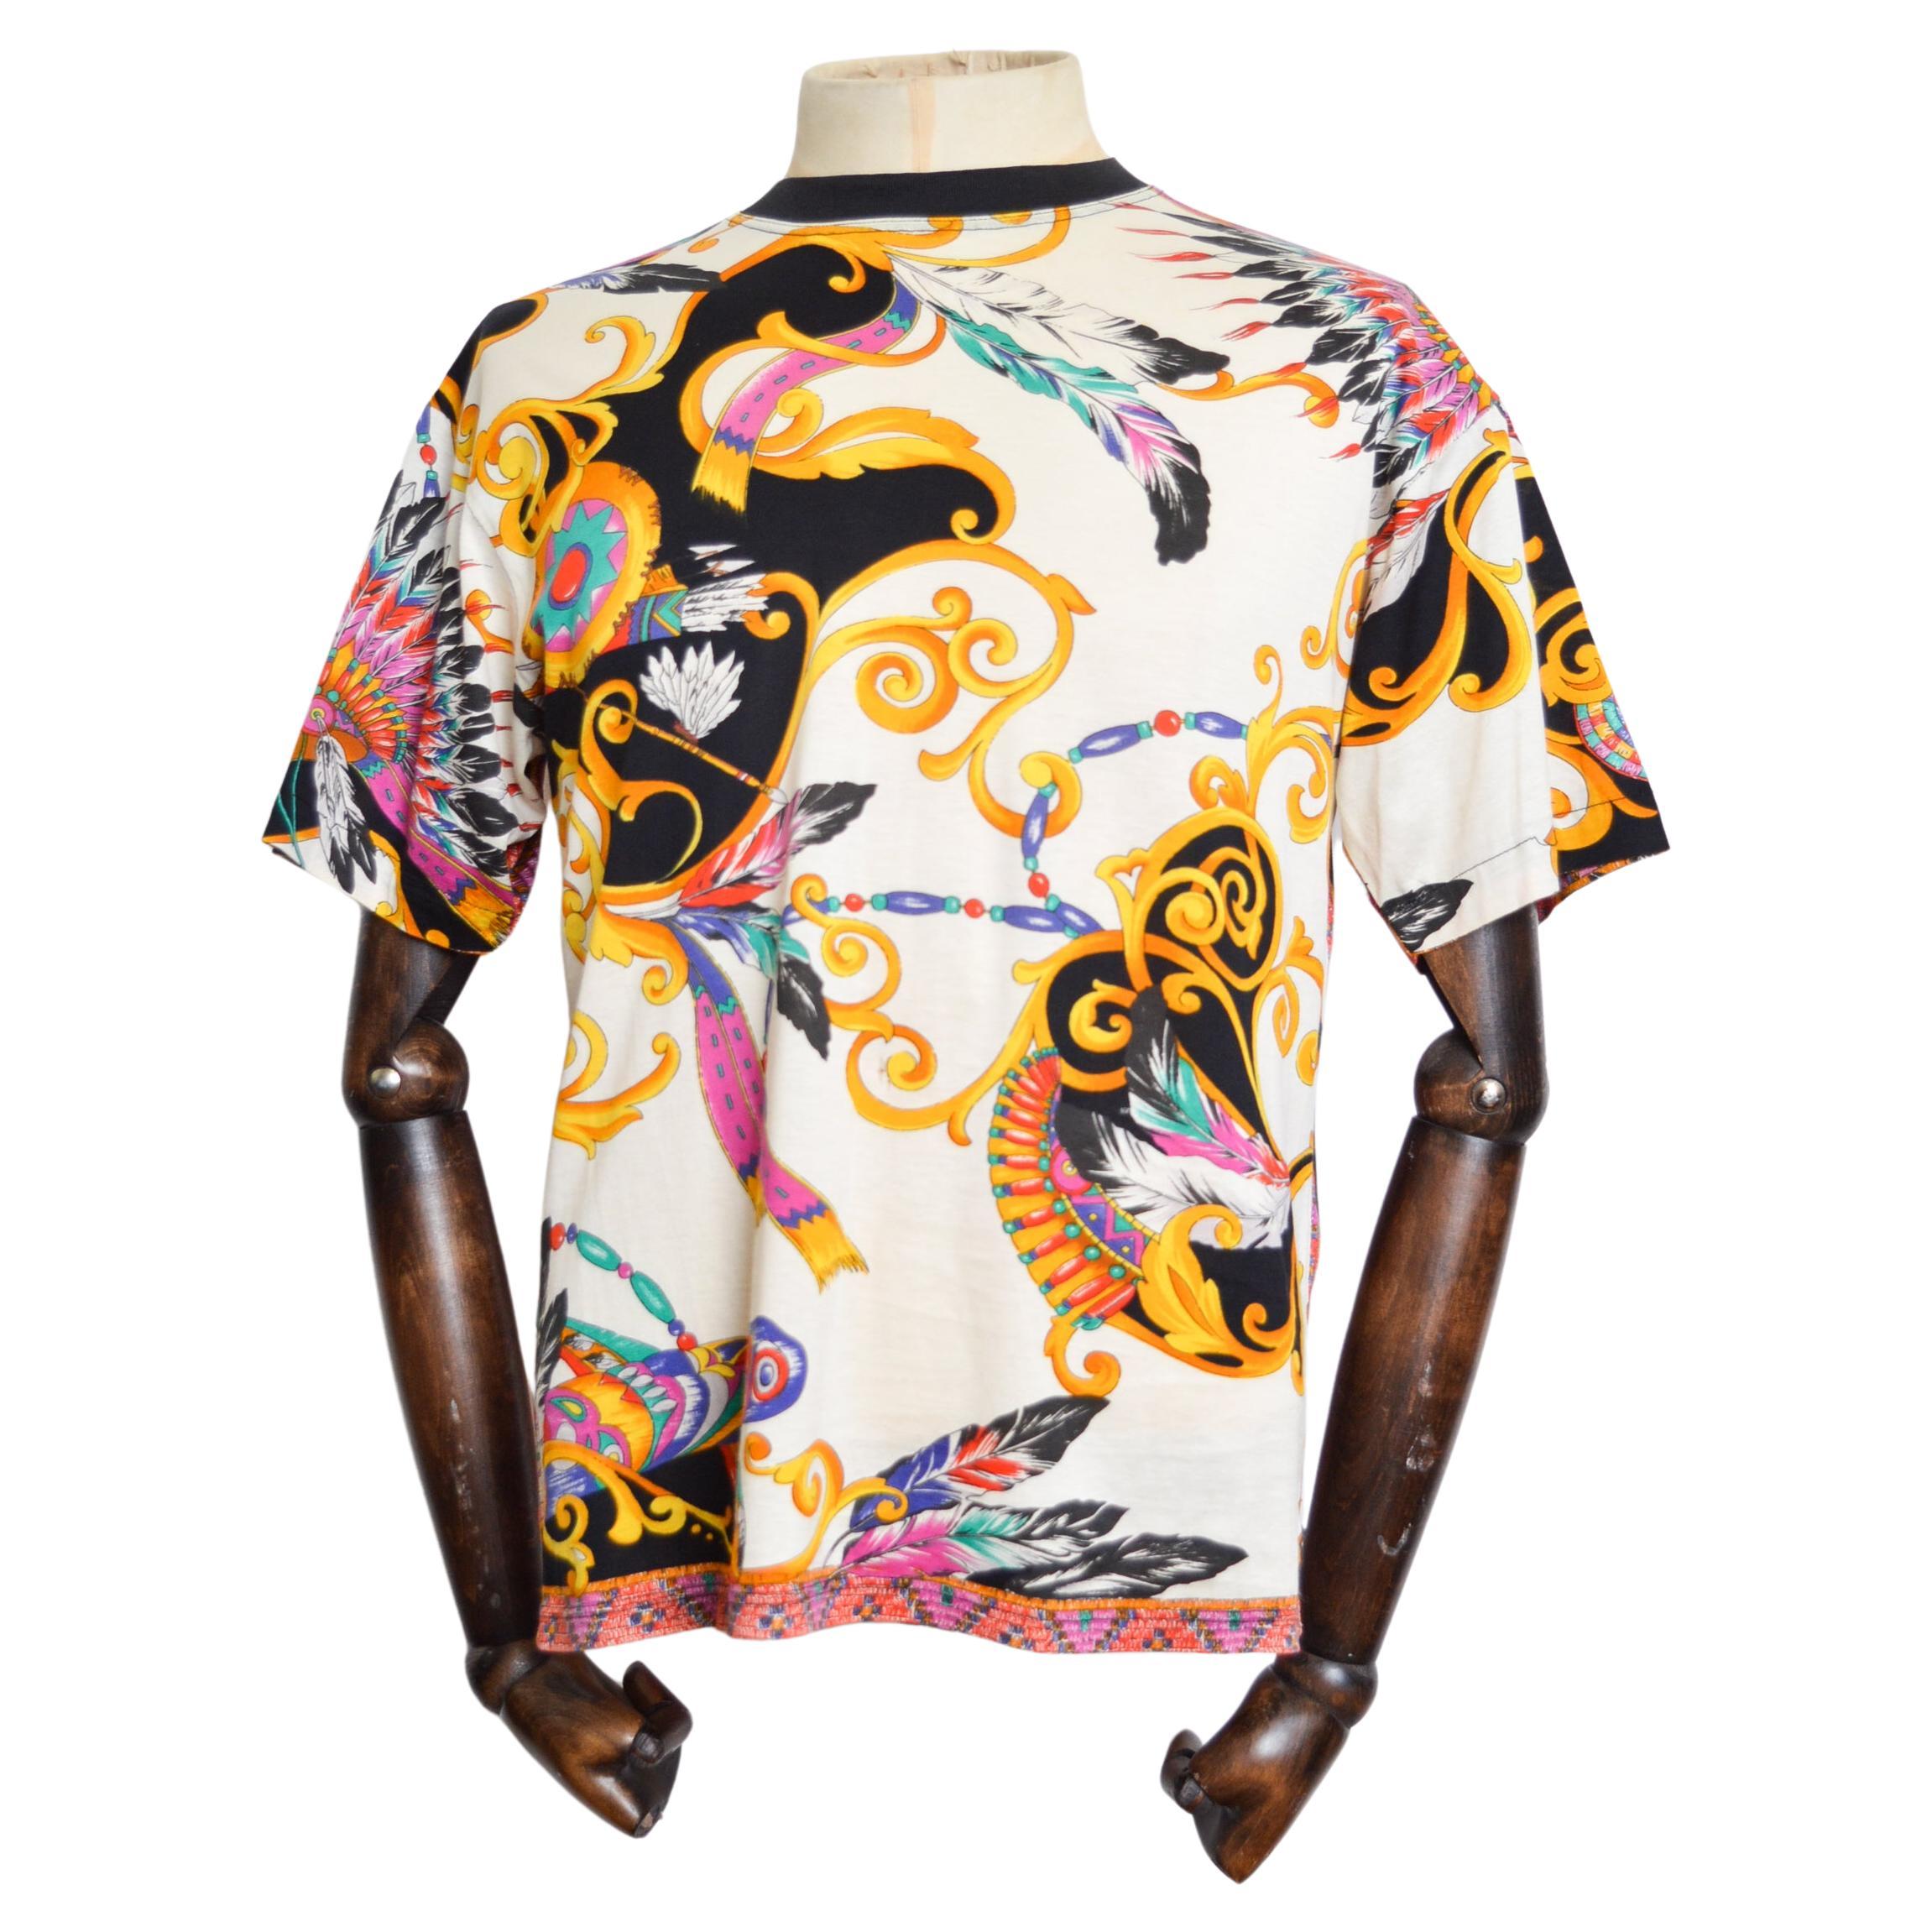 1990's VERSACE Native American Print Colourful Patterned T-Shirt - Tee For Sale